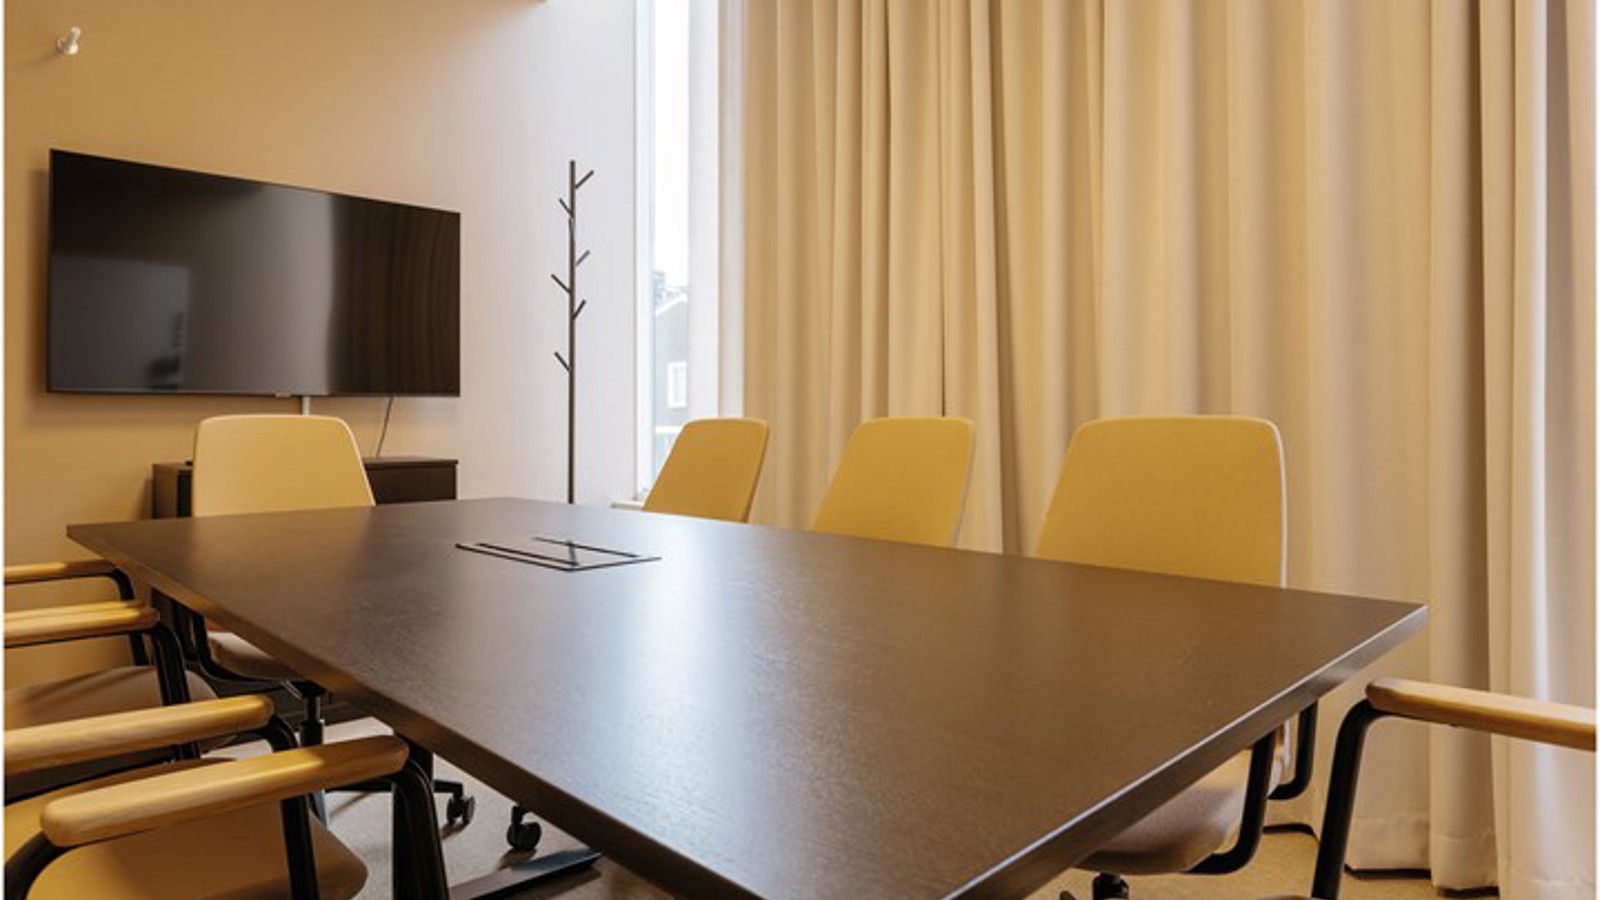 Conference room with board seating in yellow tones with TV, brown table and drapery